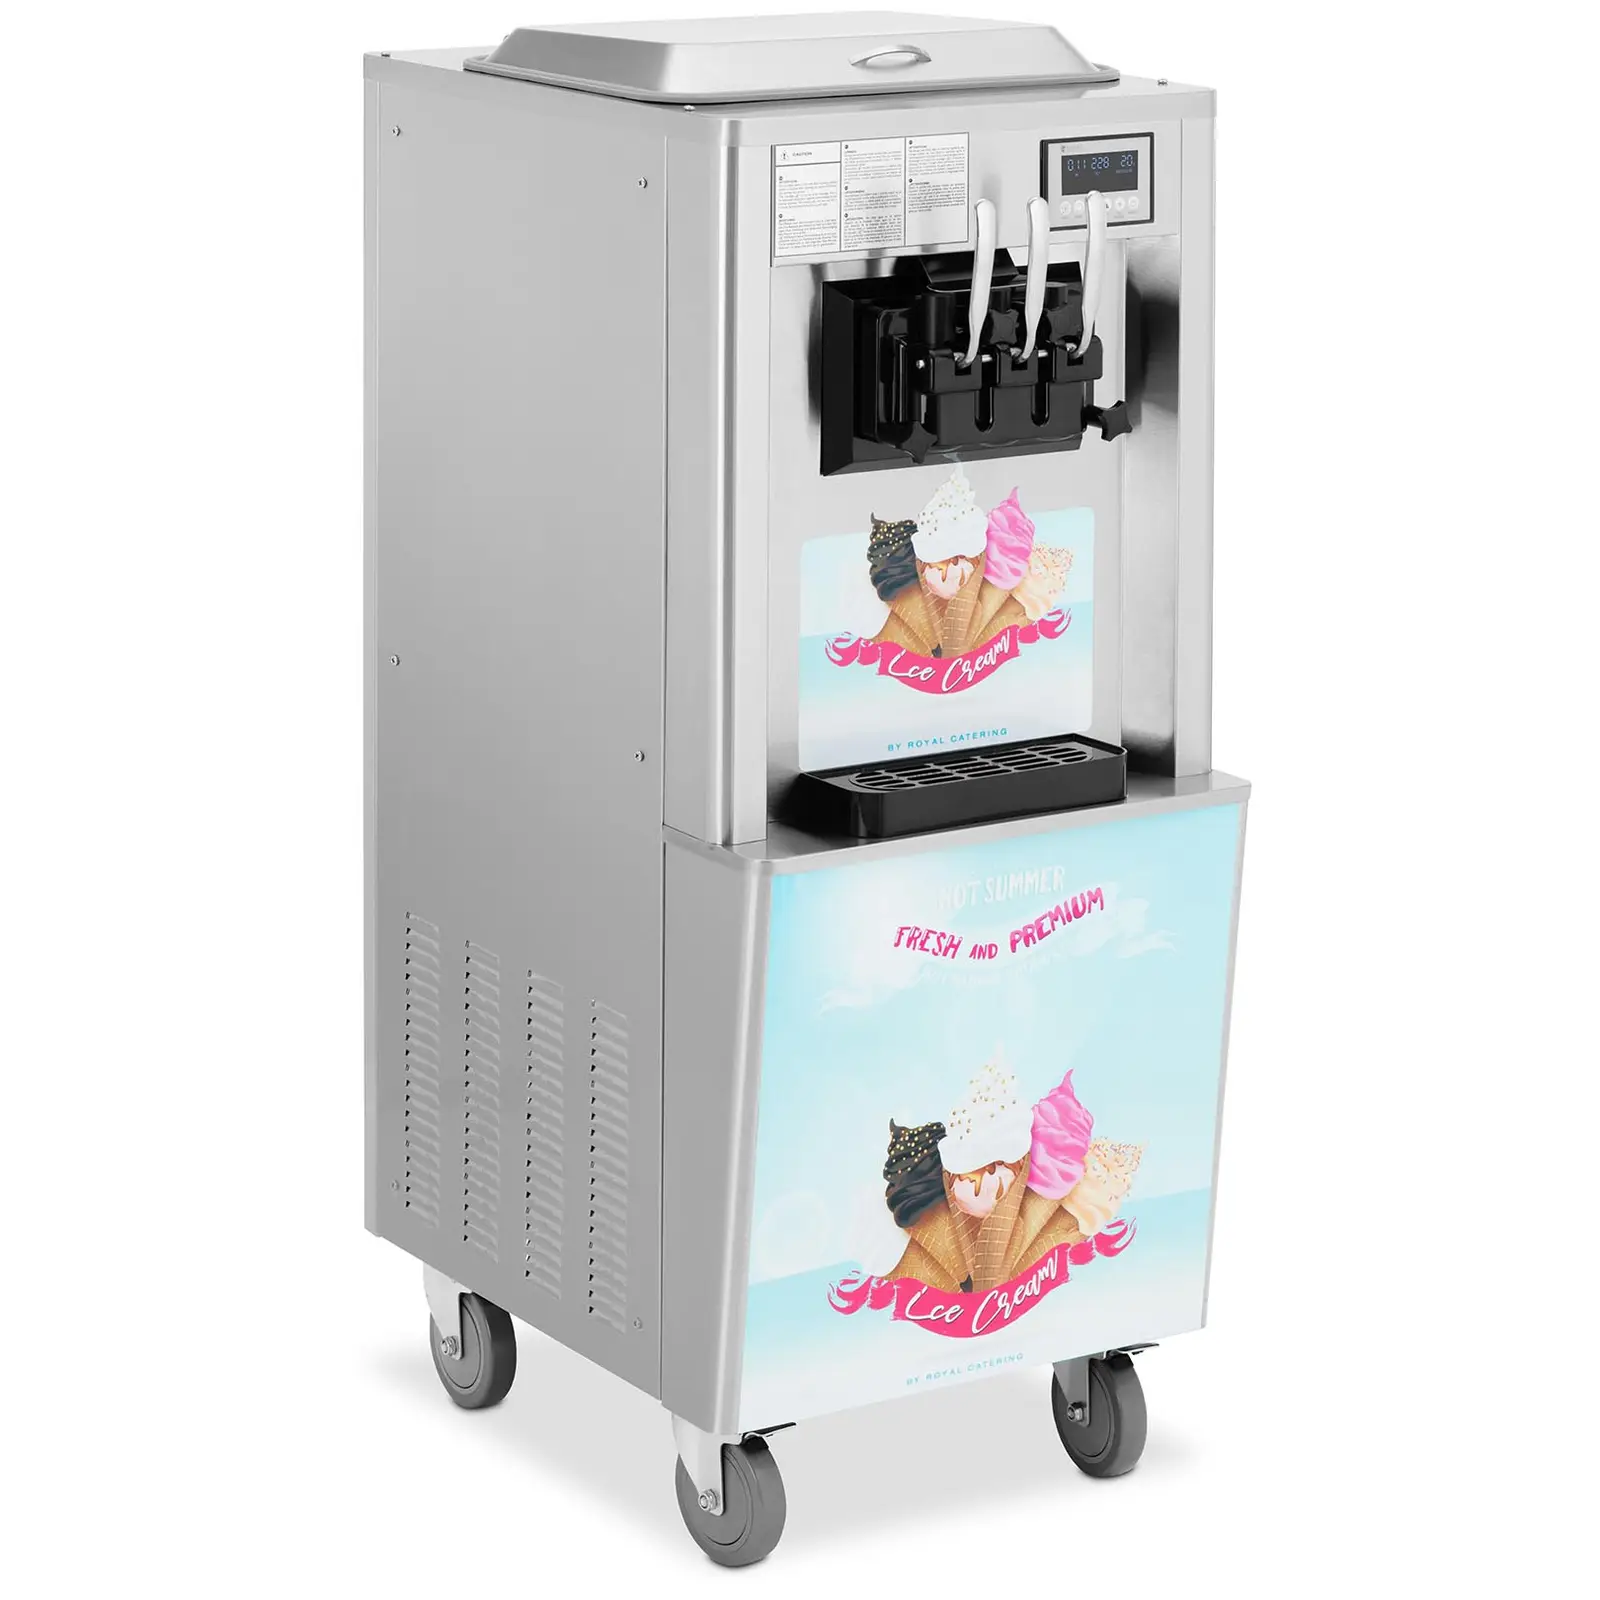 Softicemaskine - 2140 W - 33 l/t - 3 smagsvarianter - Royal Catering